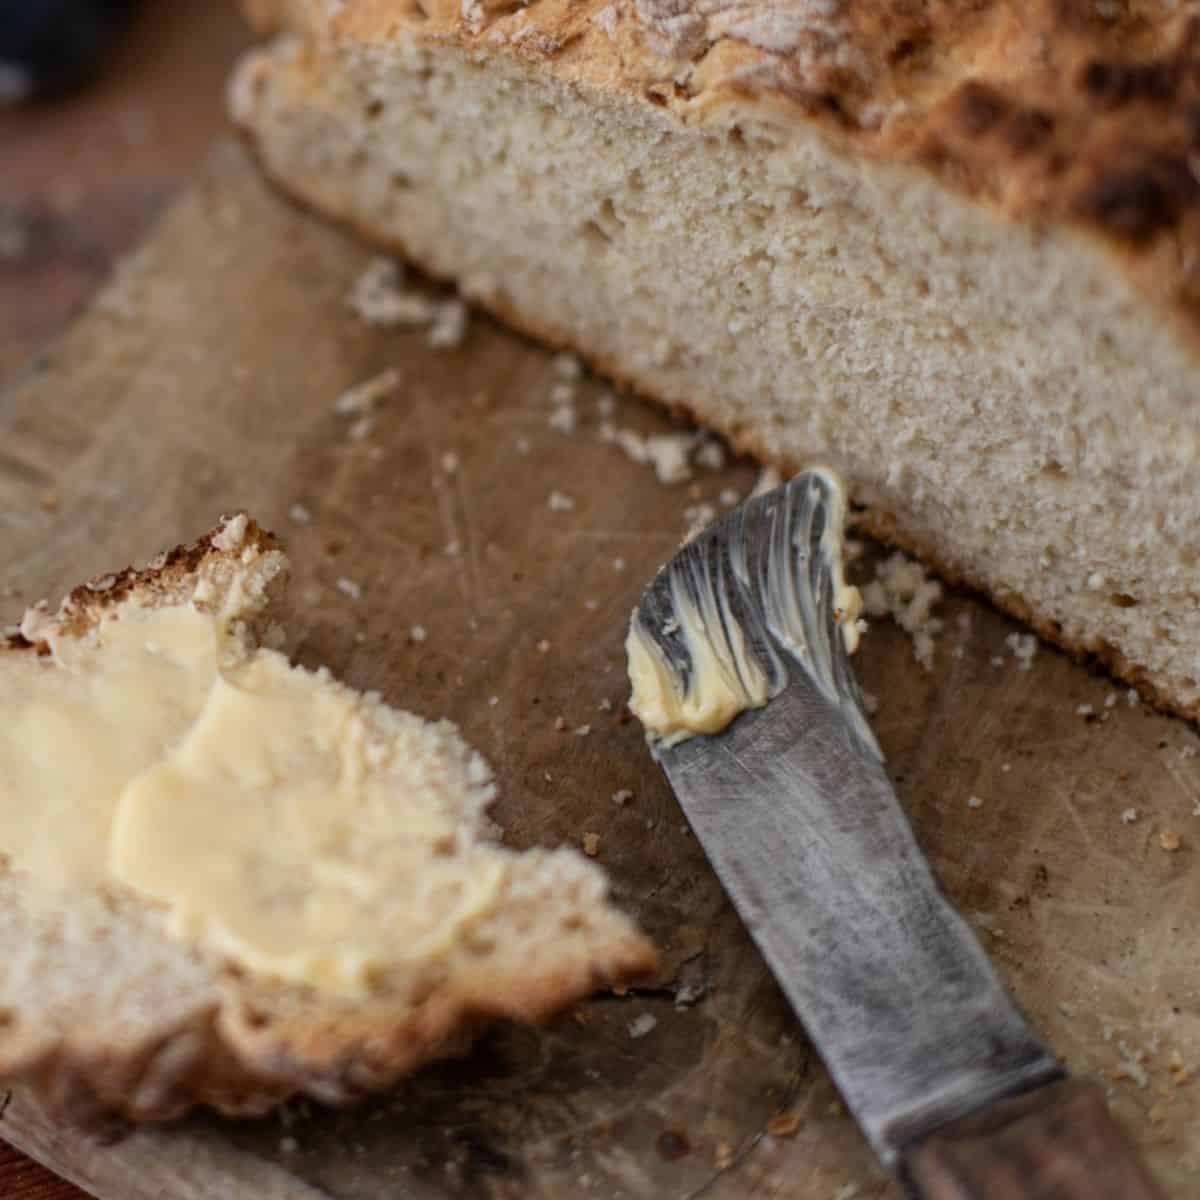 How to Make Quick and Easy Vegan Beer Bread – Just Stir and Bake!